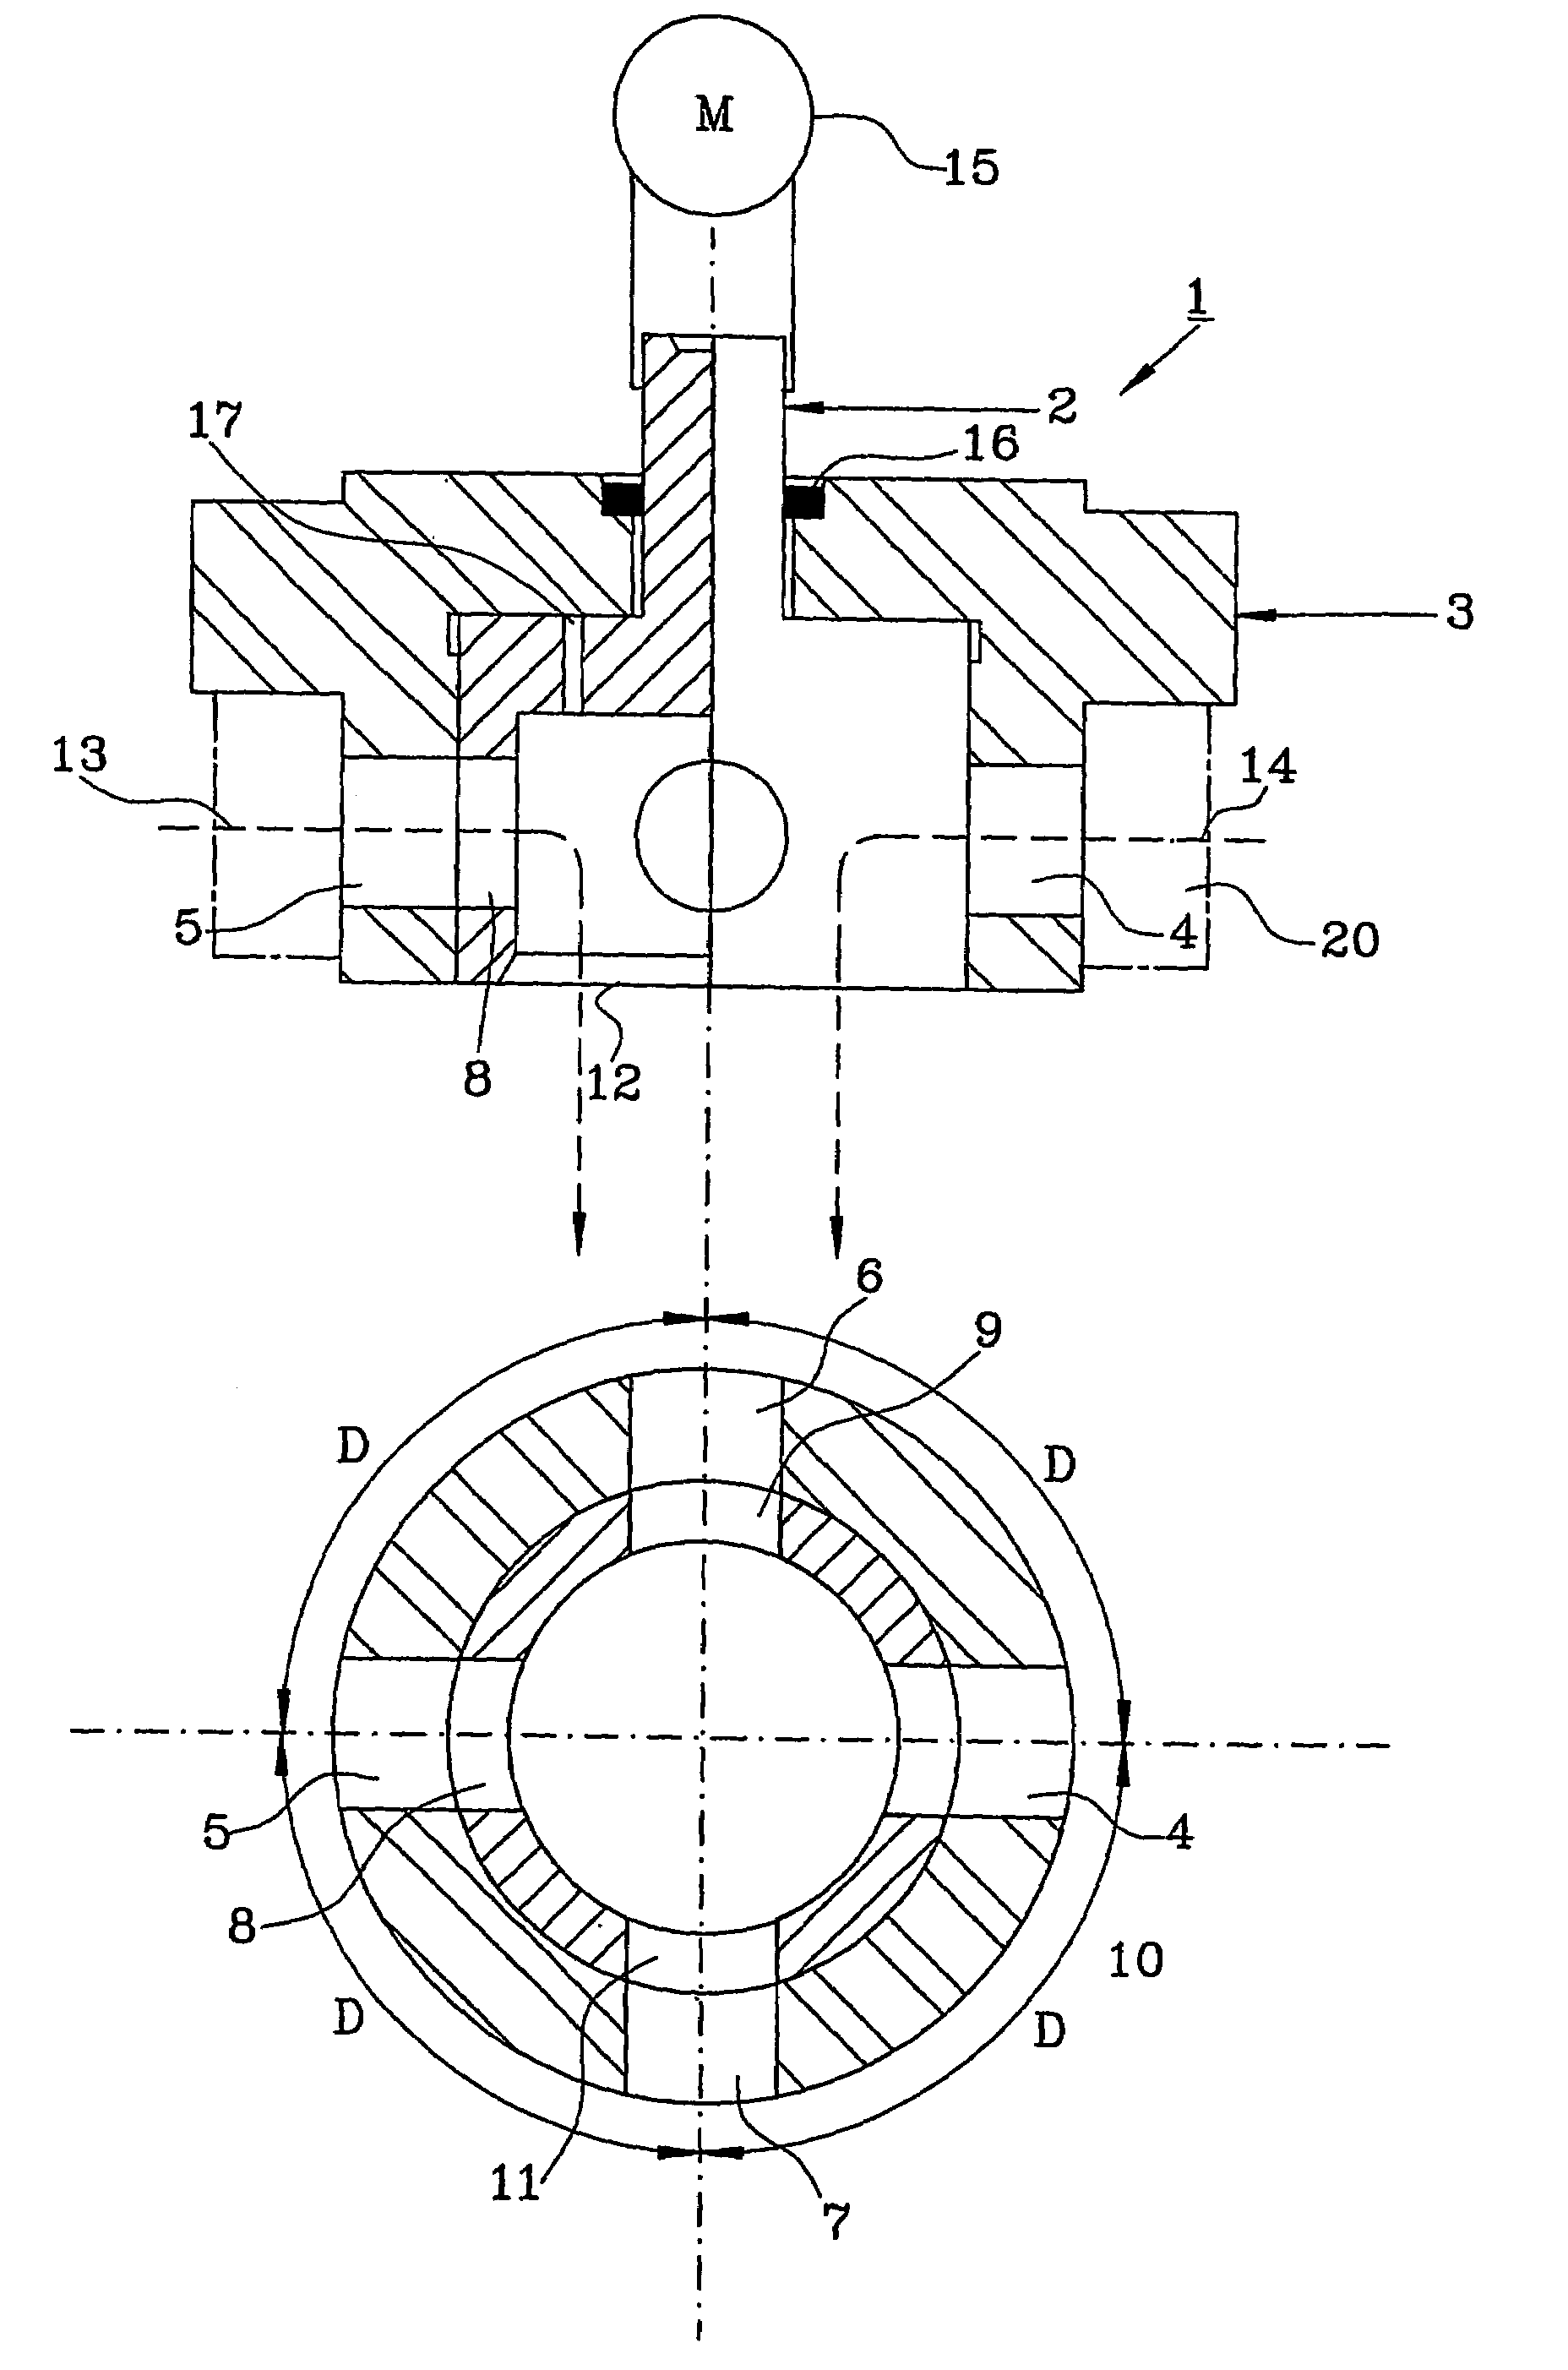 Liquid flow regulating device and dynamometer testing device